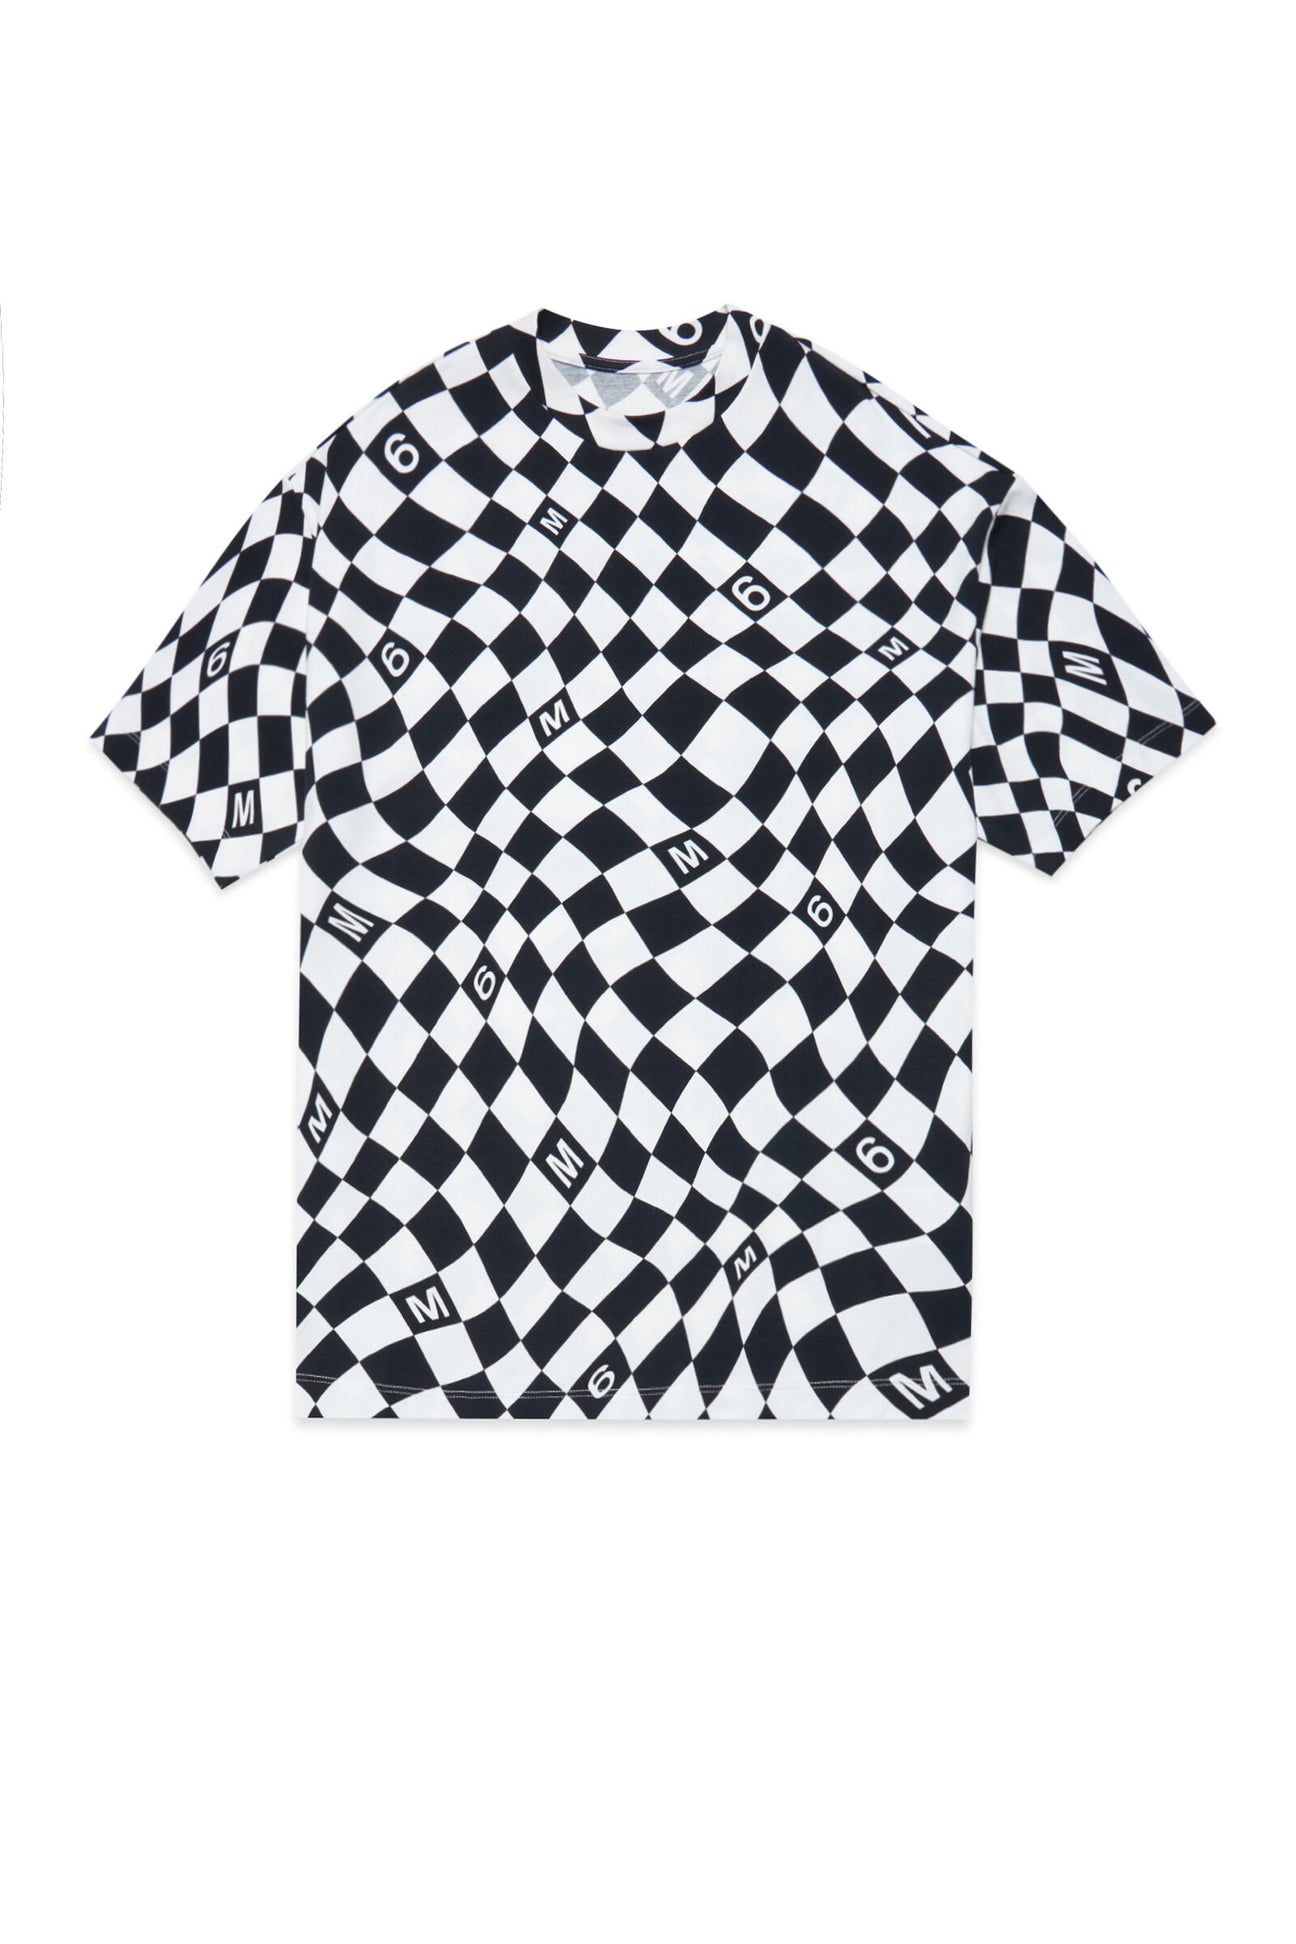 Maxi t-shirt cover-up with black and white chequered pattern 